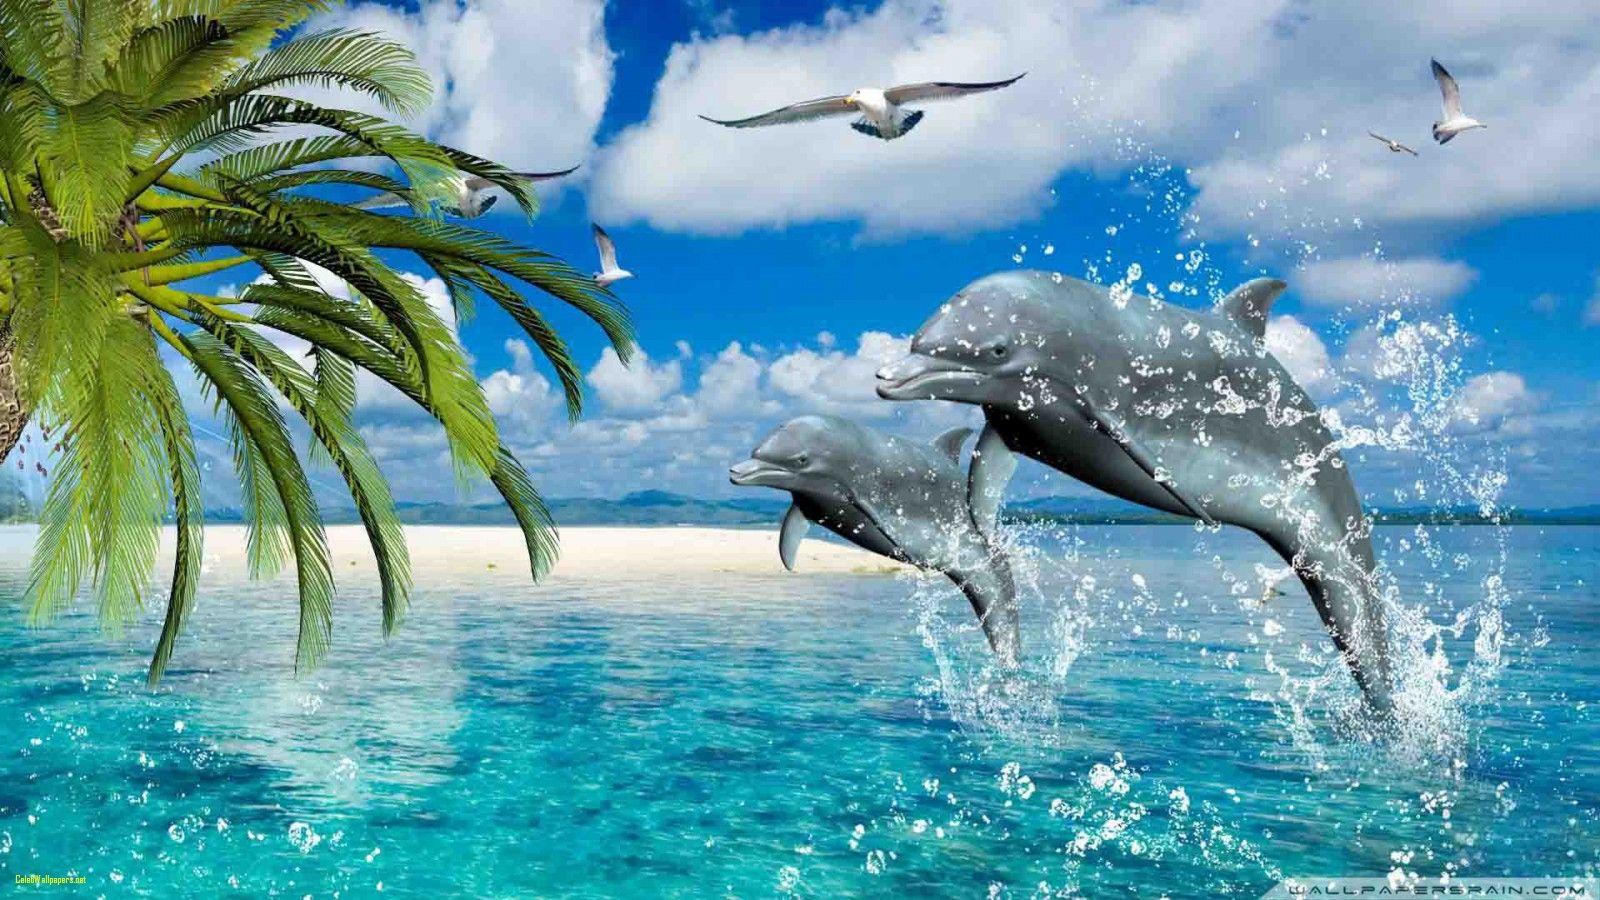 Hdimage Dolphin Wallpaper HD Image 8